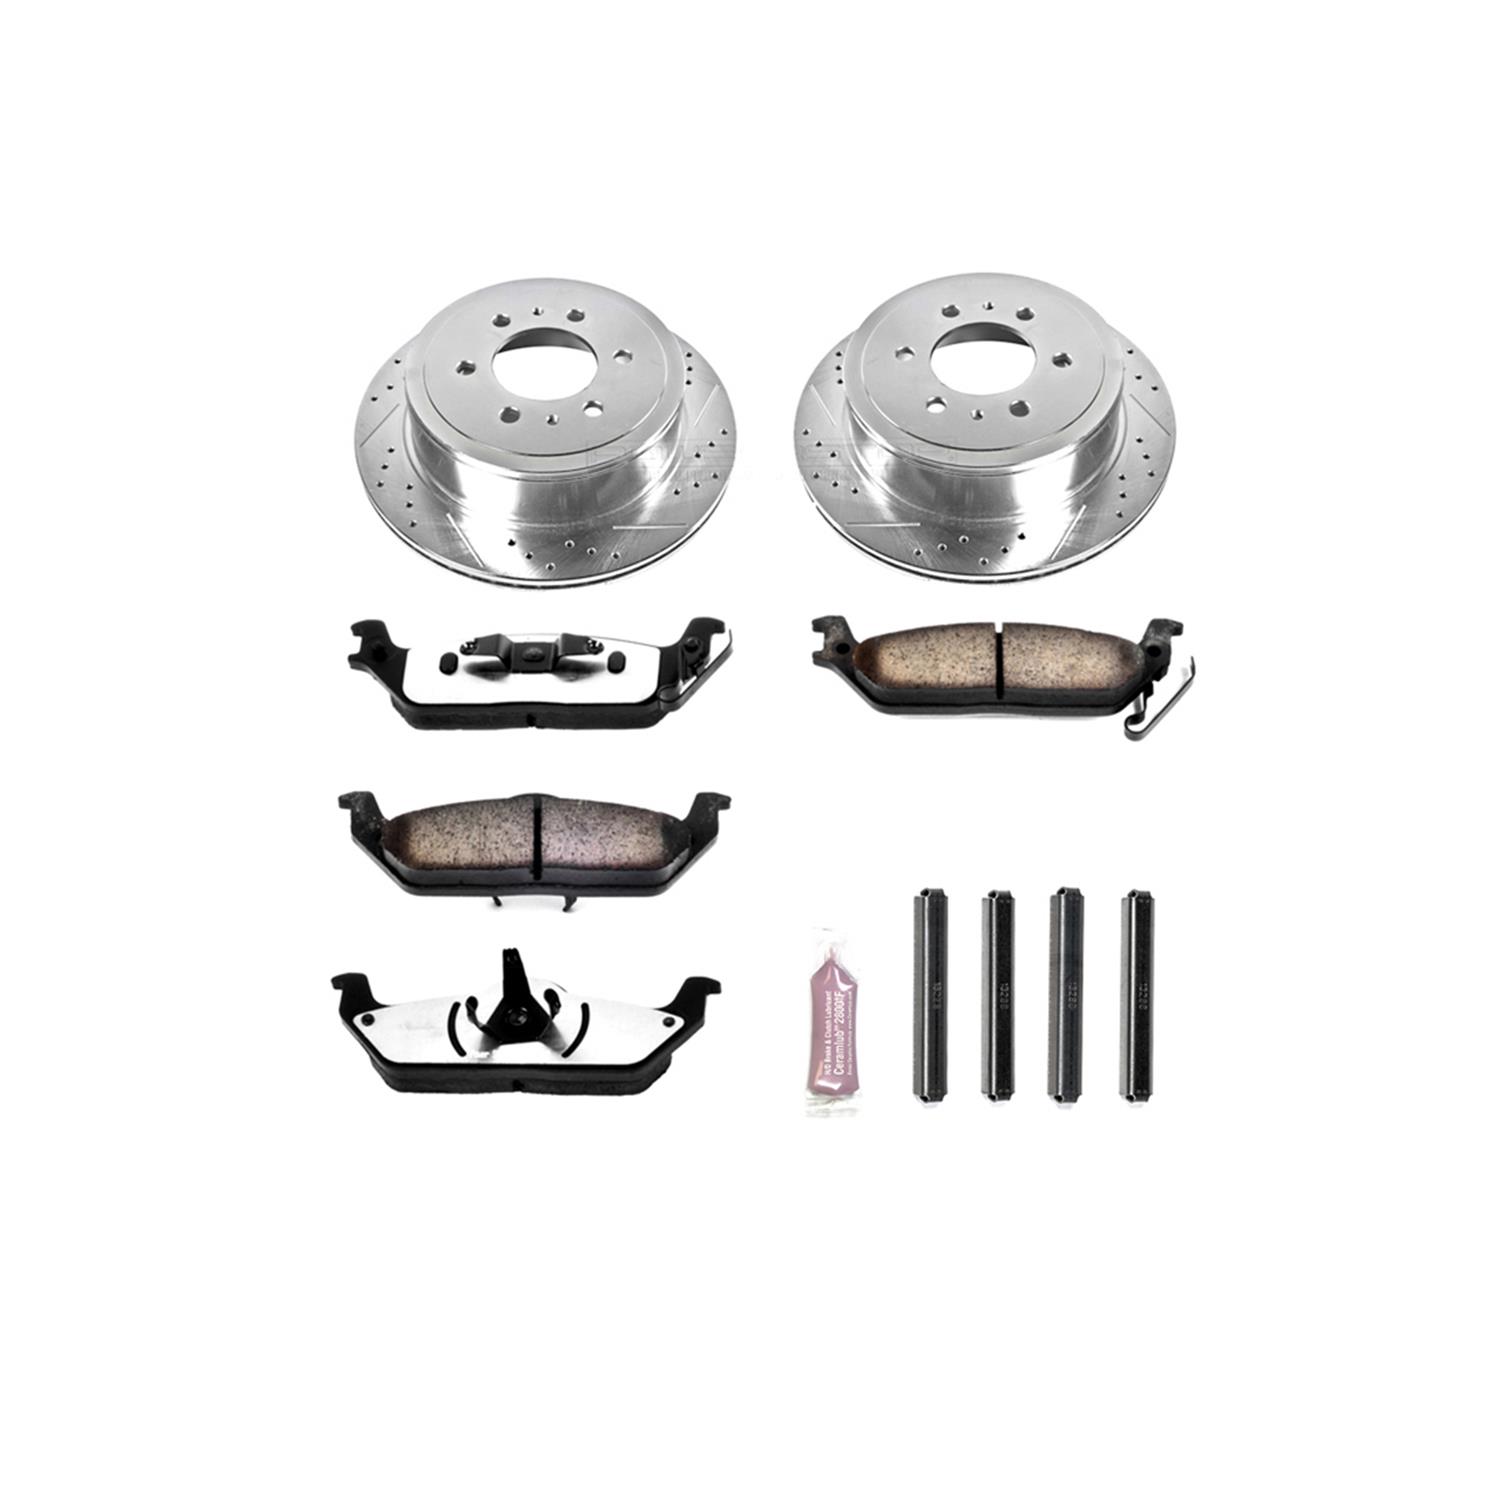 Power Stop K1950-36 Power Stop Z36 Truck and Tow Brake Upgrade Kits